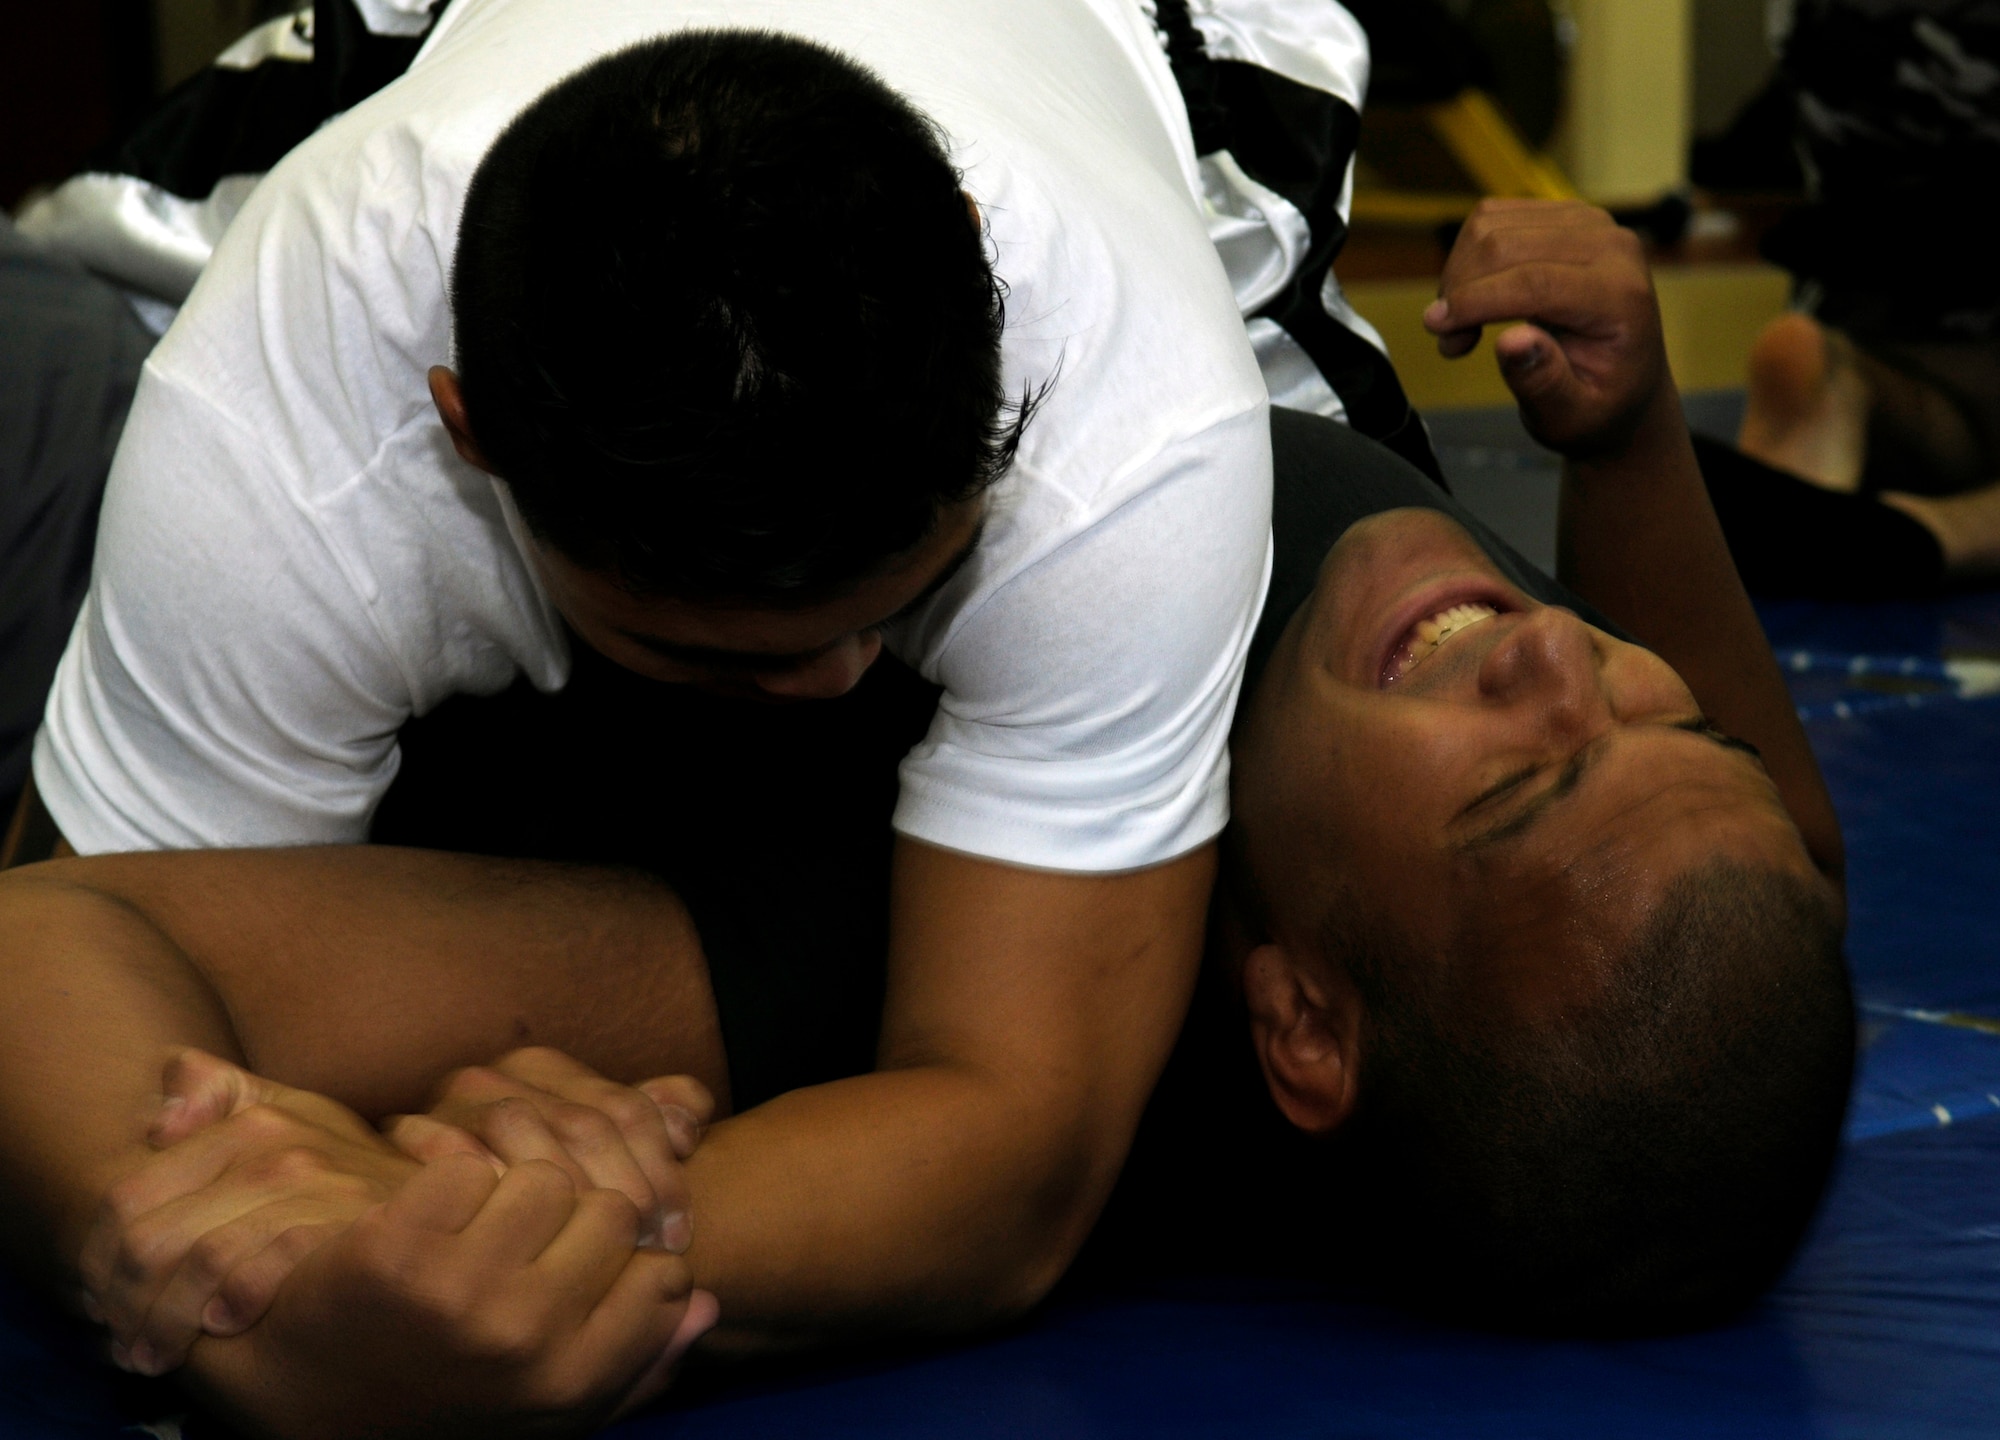 Staff Sgt. Michael Limiac, a 39th Medical Support Squadron medical information systems technician, gets Staff Sgt. Roberto Cruz, a 39th Comptroller Squadron budget analyst, in an arm lock during a mixed martial arts training session Friday, Aug. 7, 2009 in the Fitness Center at Incirlik Air Base, Turkey.  Sergeant Limiac coordinates the workout sessions three times per week.  Participants of all skill levels attend the workouts and train to build on their knowledge of the sport.   More than 20 Airmen have attended the workouts since implementation.  (U.S. Air Force photo/Staff Sgt. Raymond Hoy)